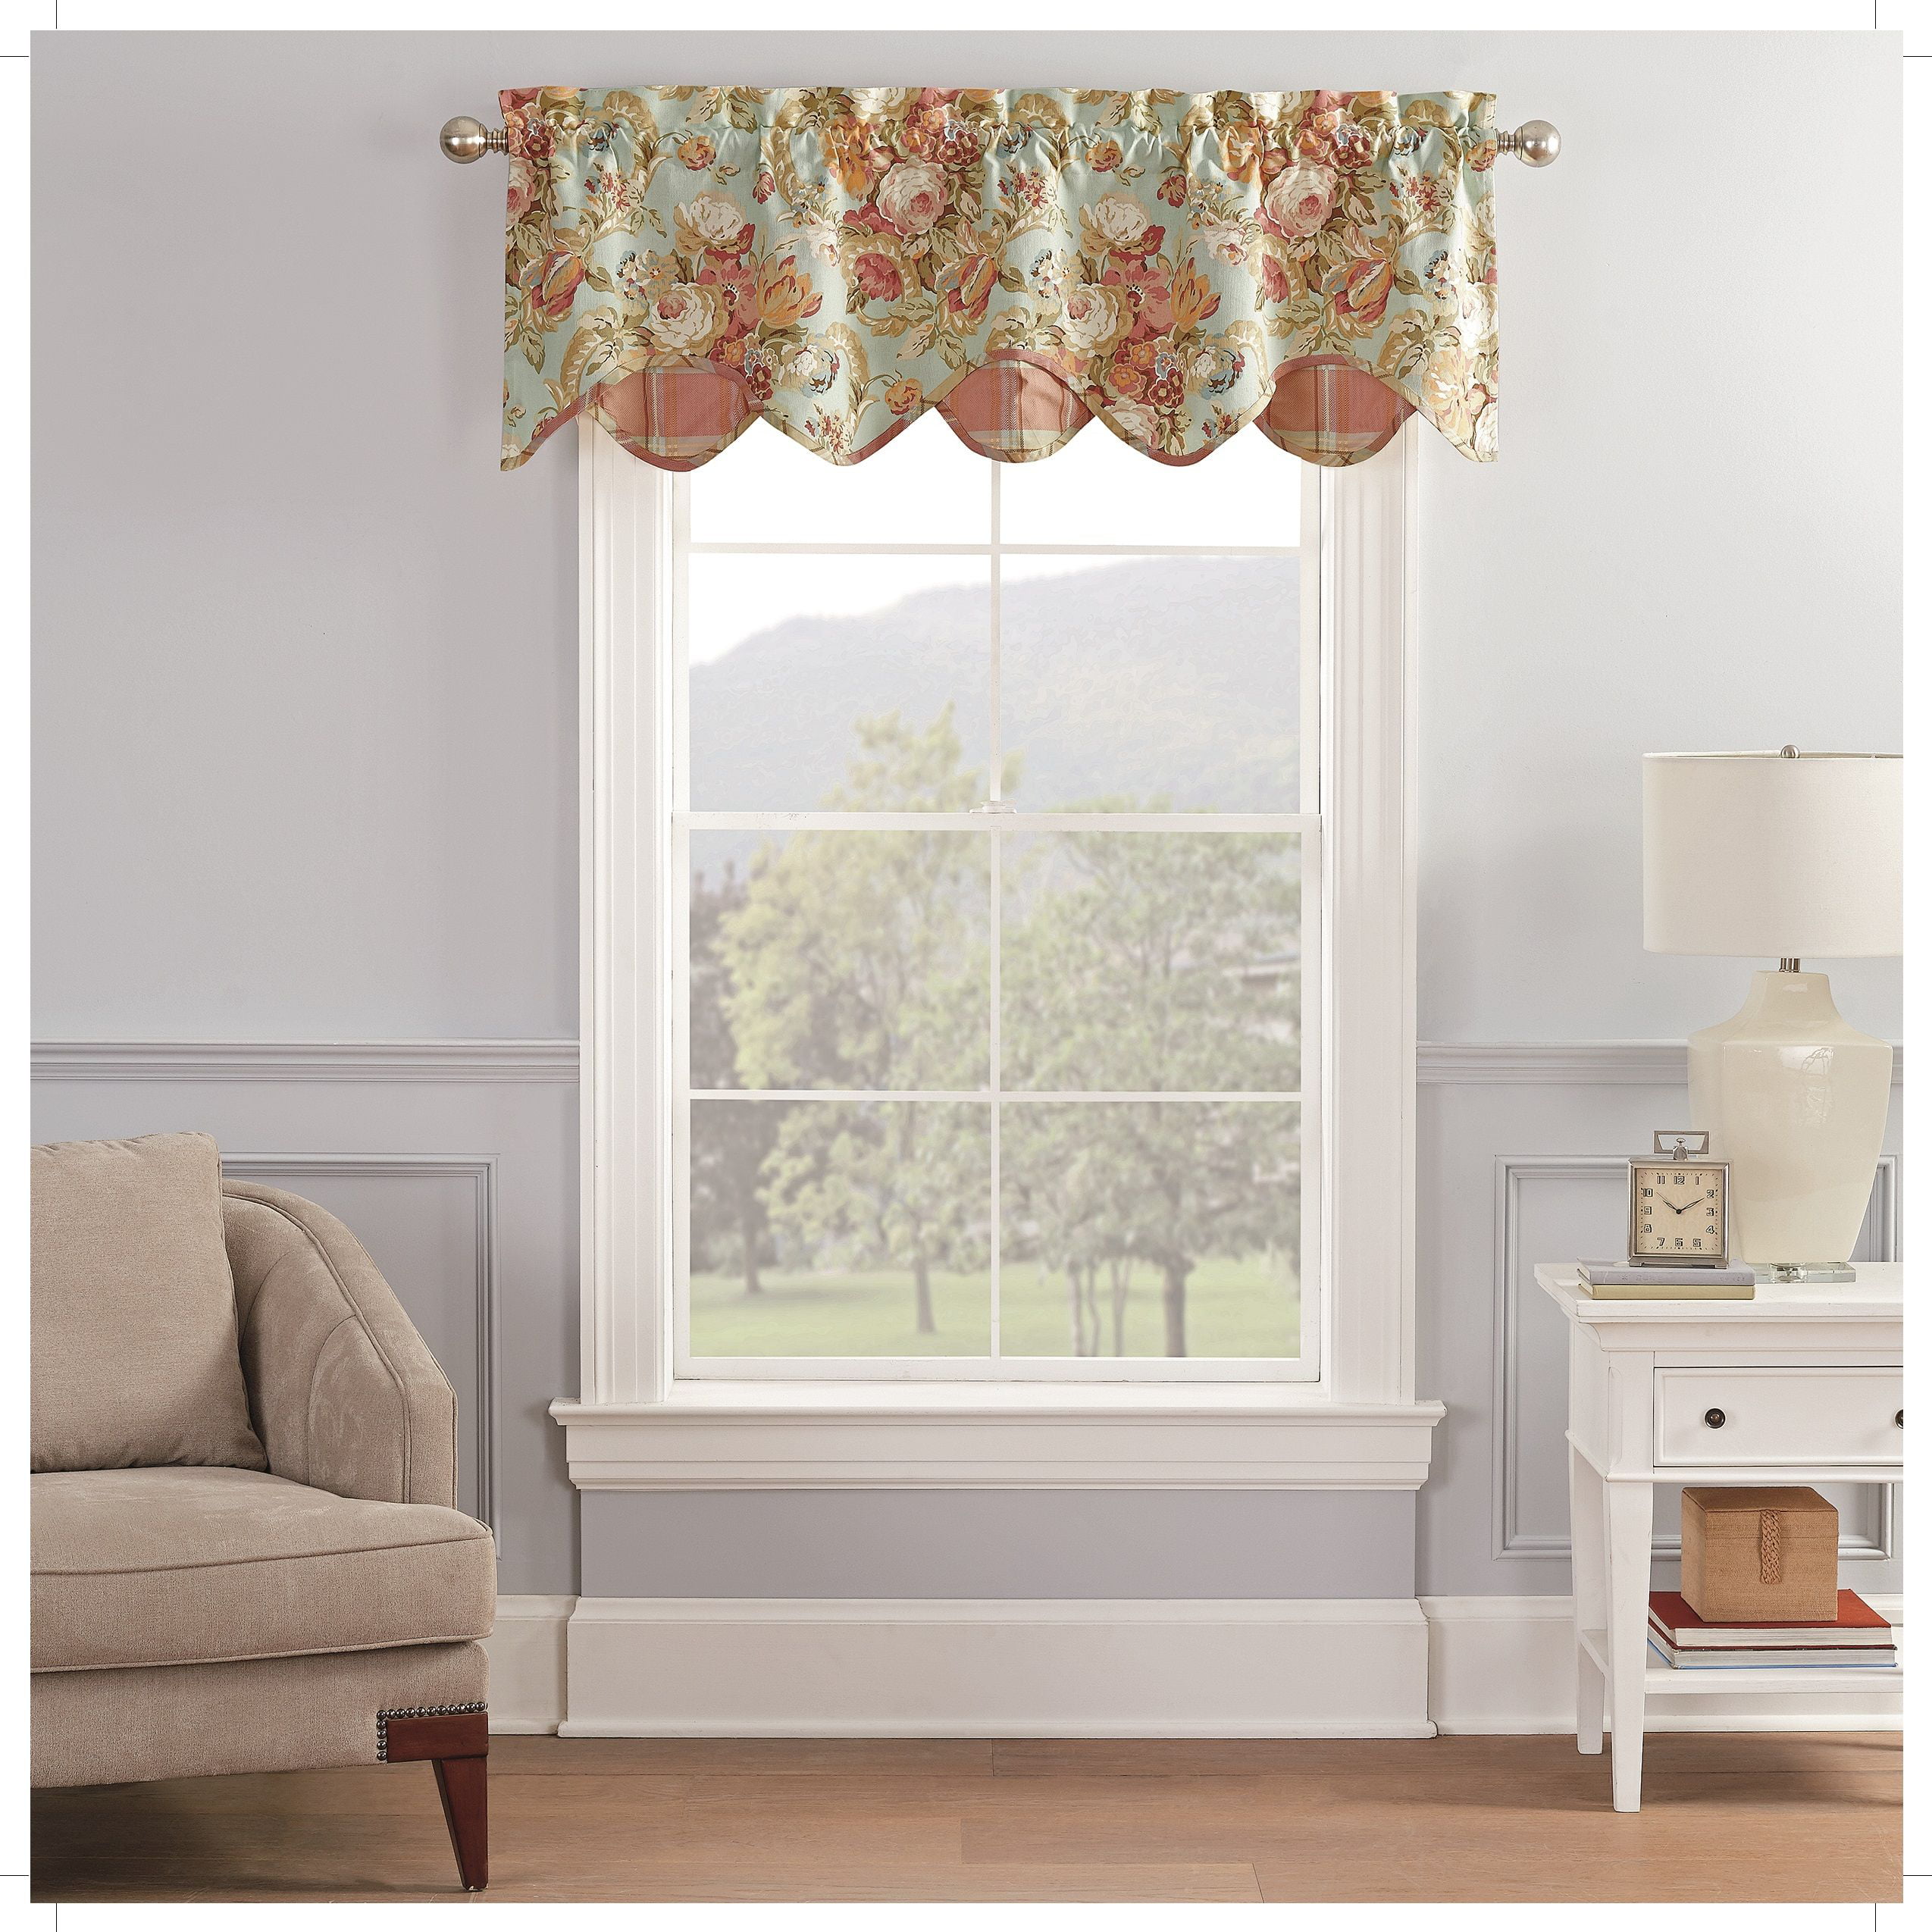 Details about   Pair of Waverly Classics Curtain Valences Beige Floral Roses 21 x 78 Rod Pocket 